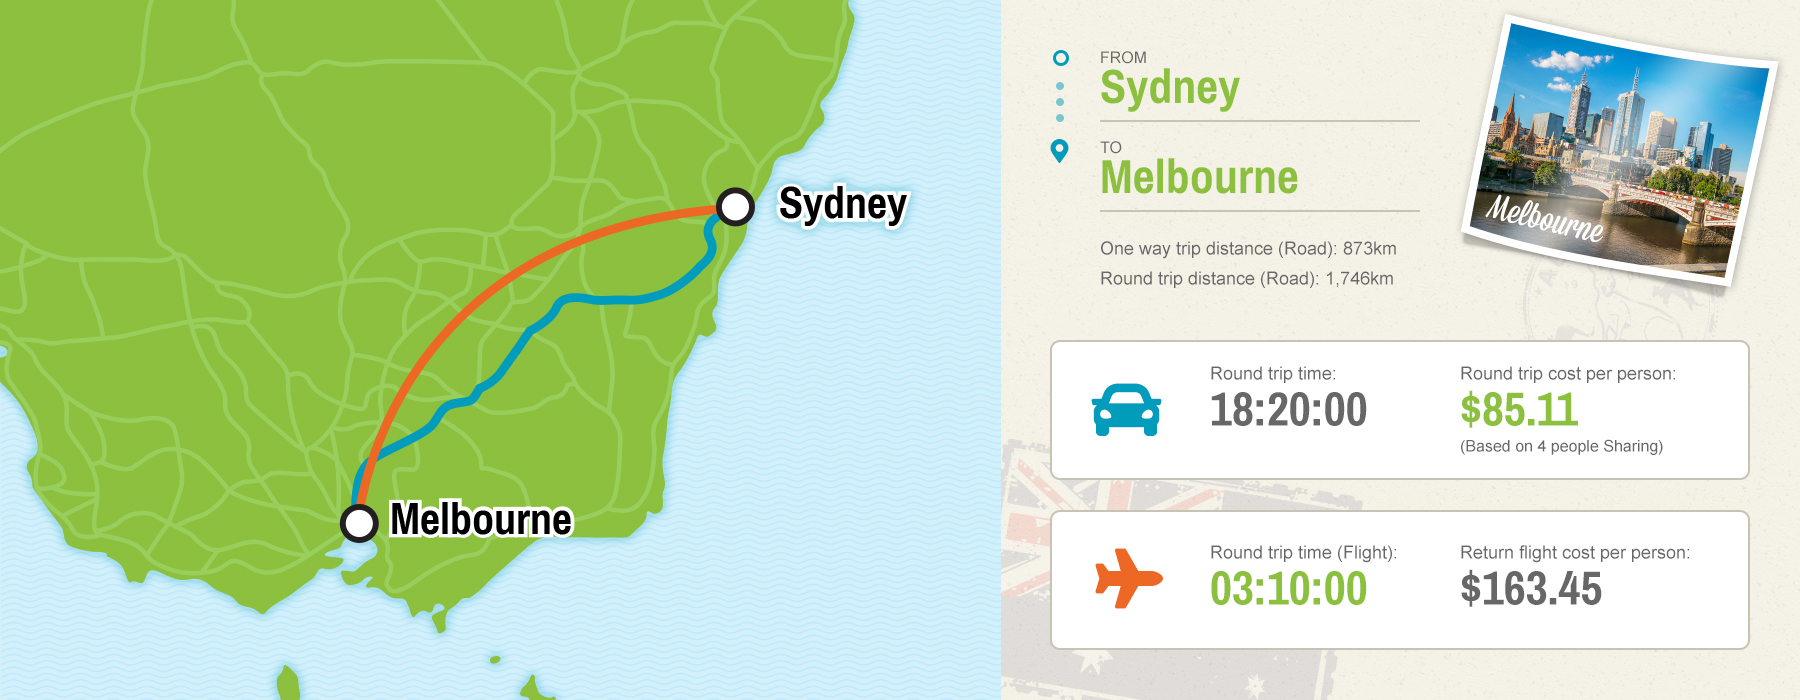 Sydney to Melbourne map showing driving vs flying